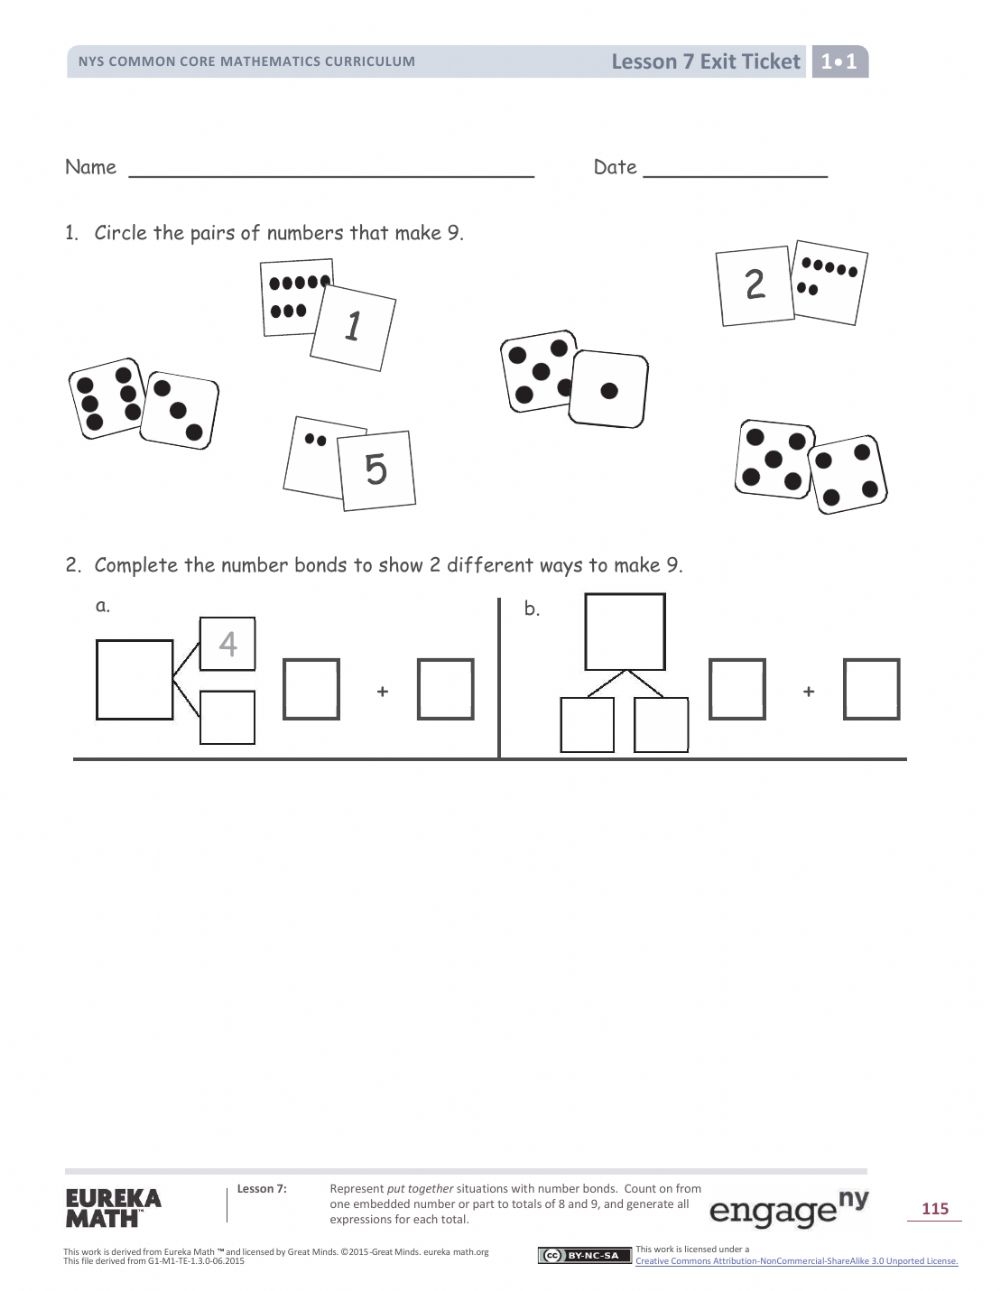 module-1-lesson-7-exit-ticket-worksheet-math-worksheet-answers